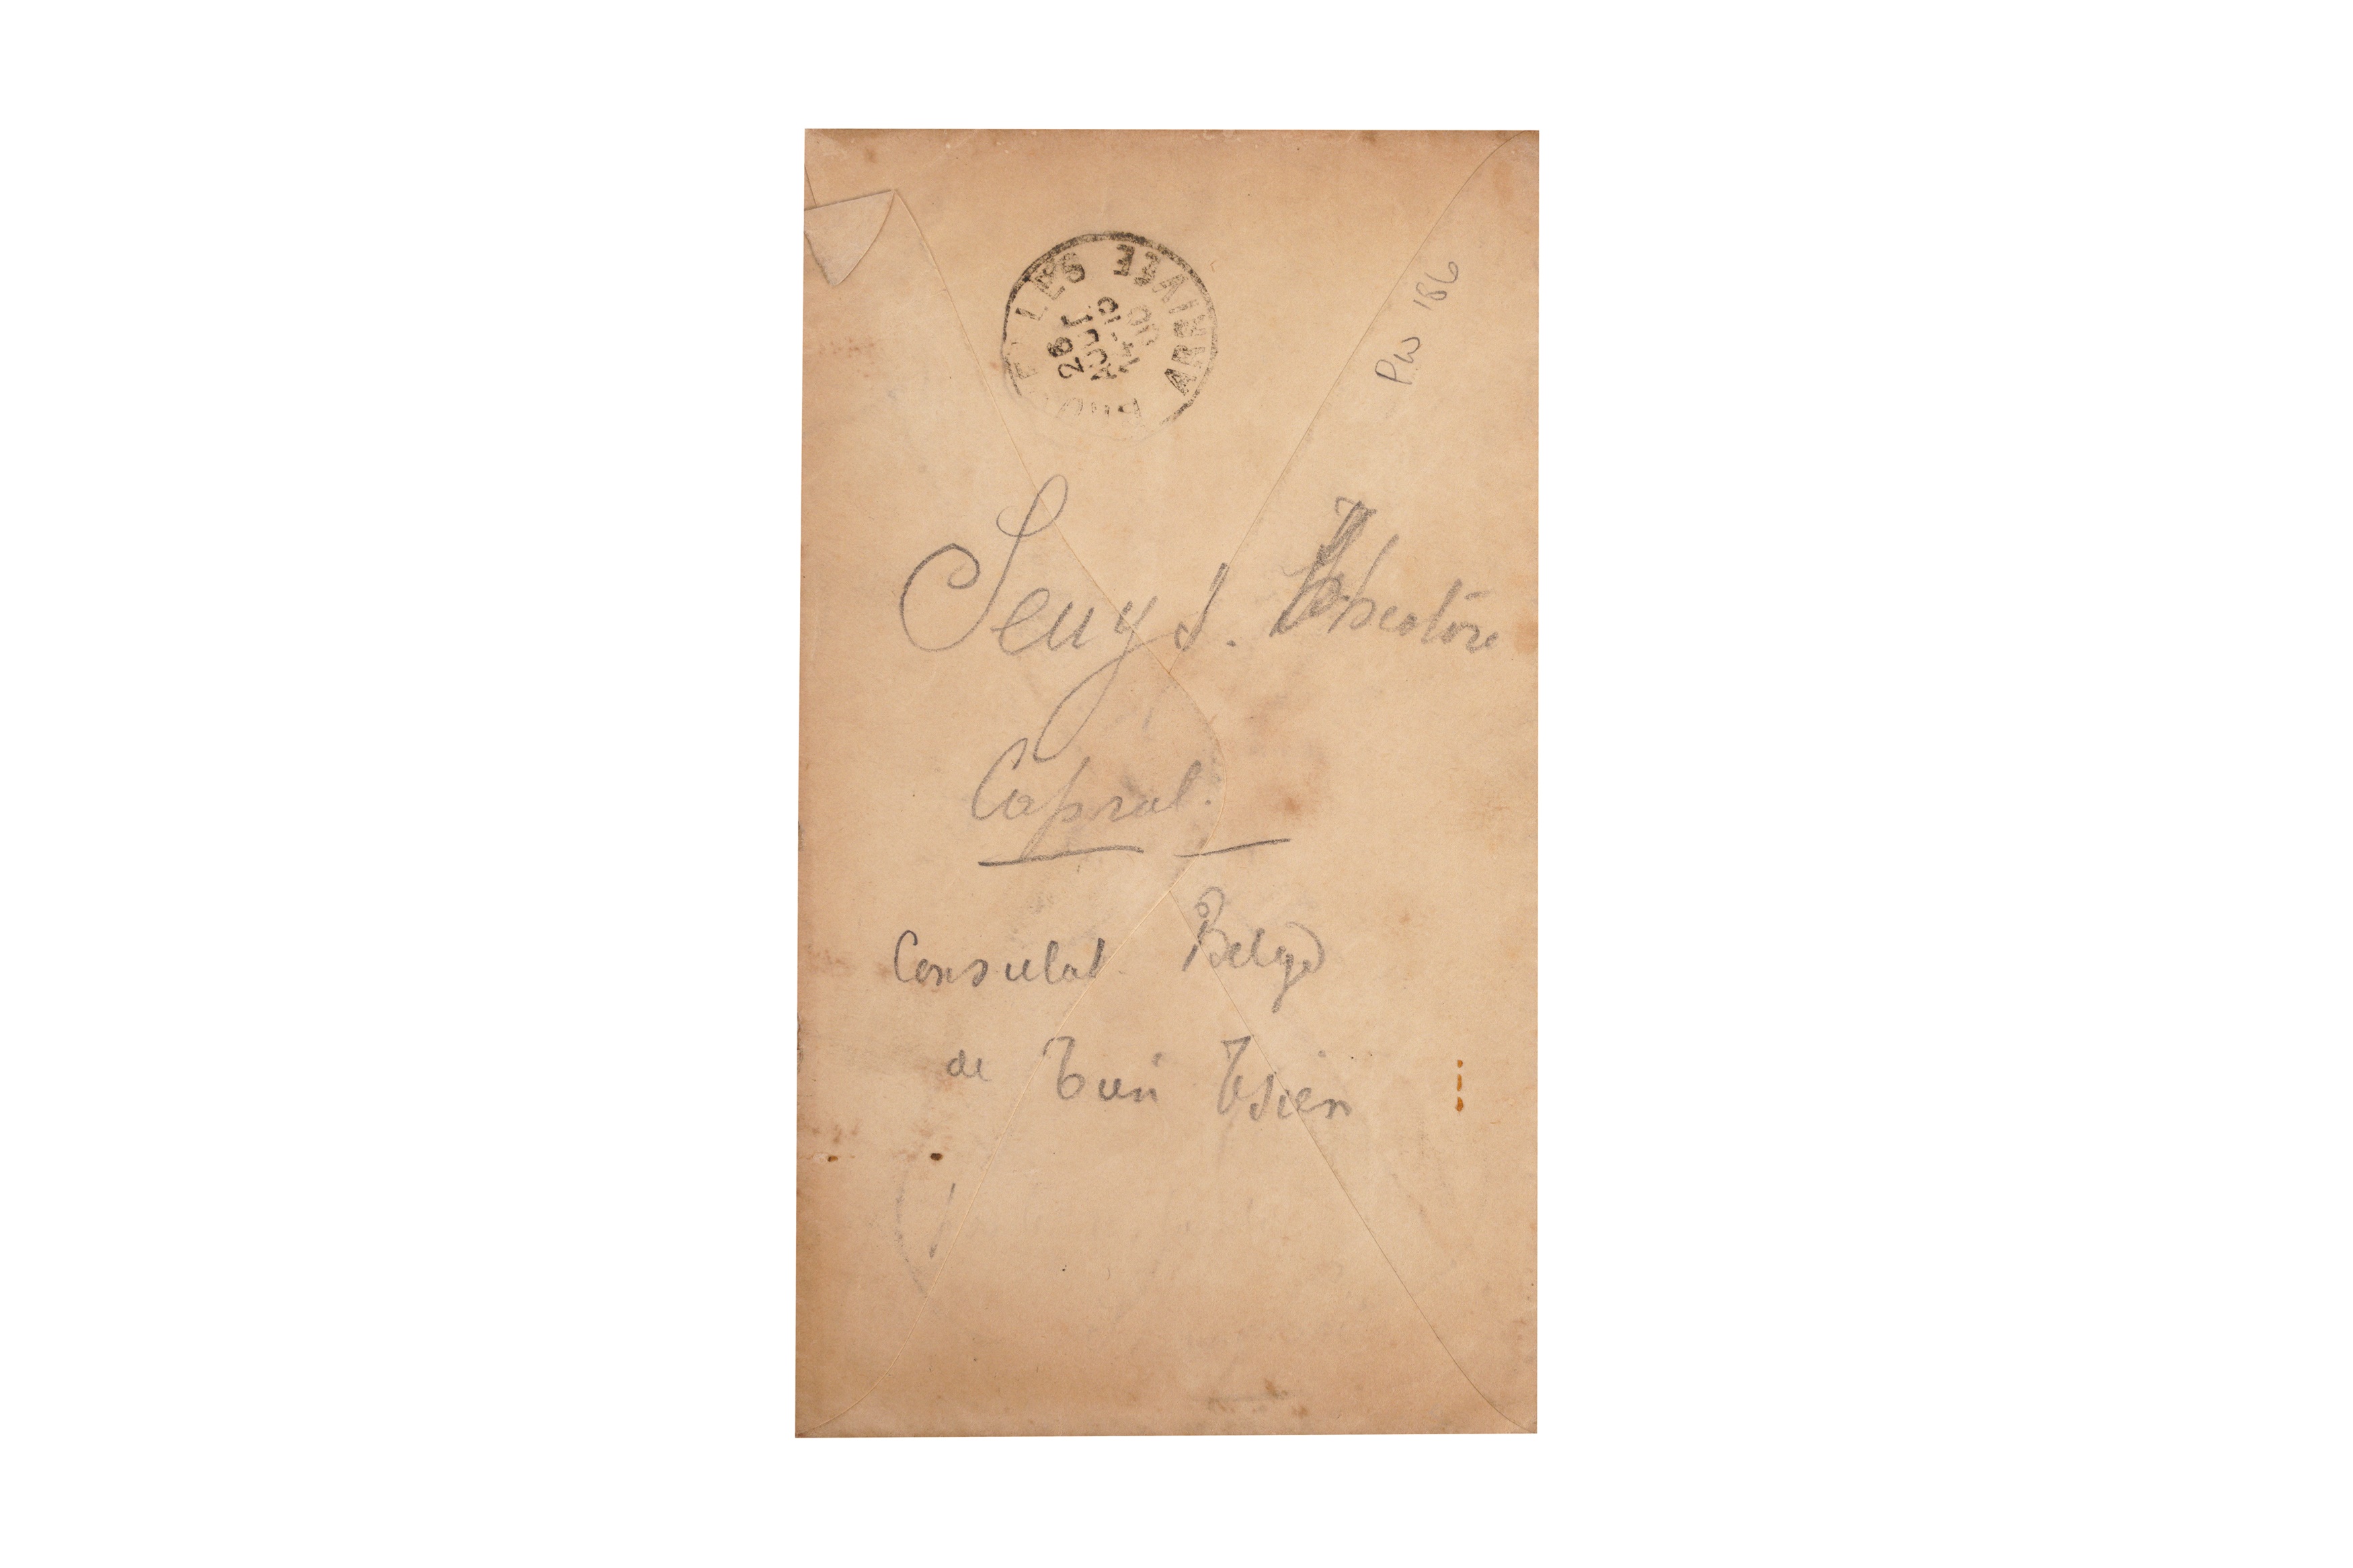 RUSSIAN P.O CHINA STATIONERY 1900 BELGIAN CONSUL TIENTSIN Preview: Barley Mow - Image 2 of 2